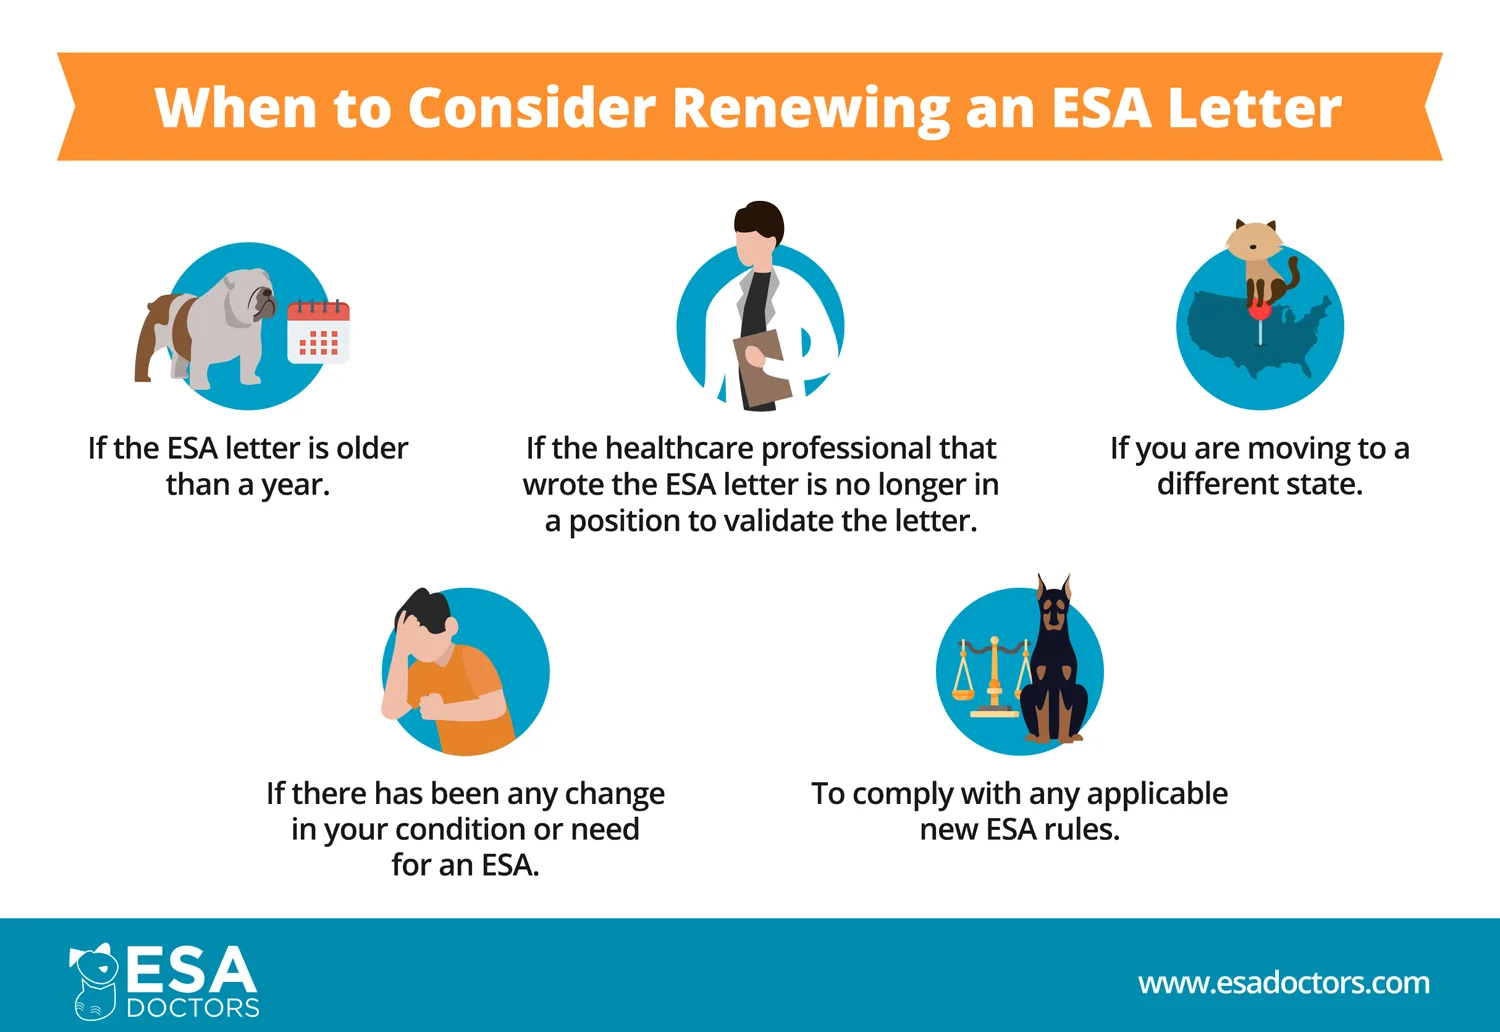 When to Consider Renewing an ESA Letter - Infographic - ESA Doctors